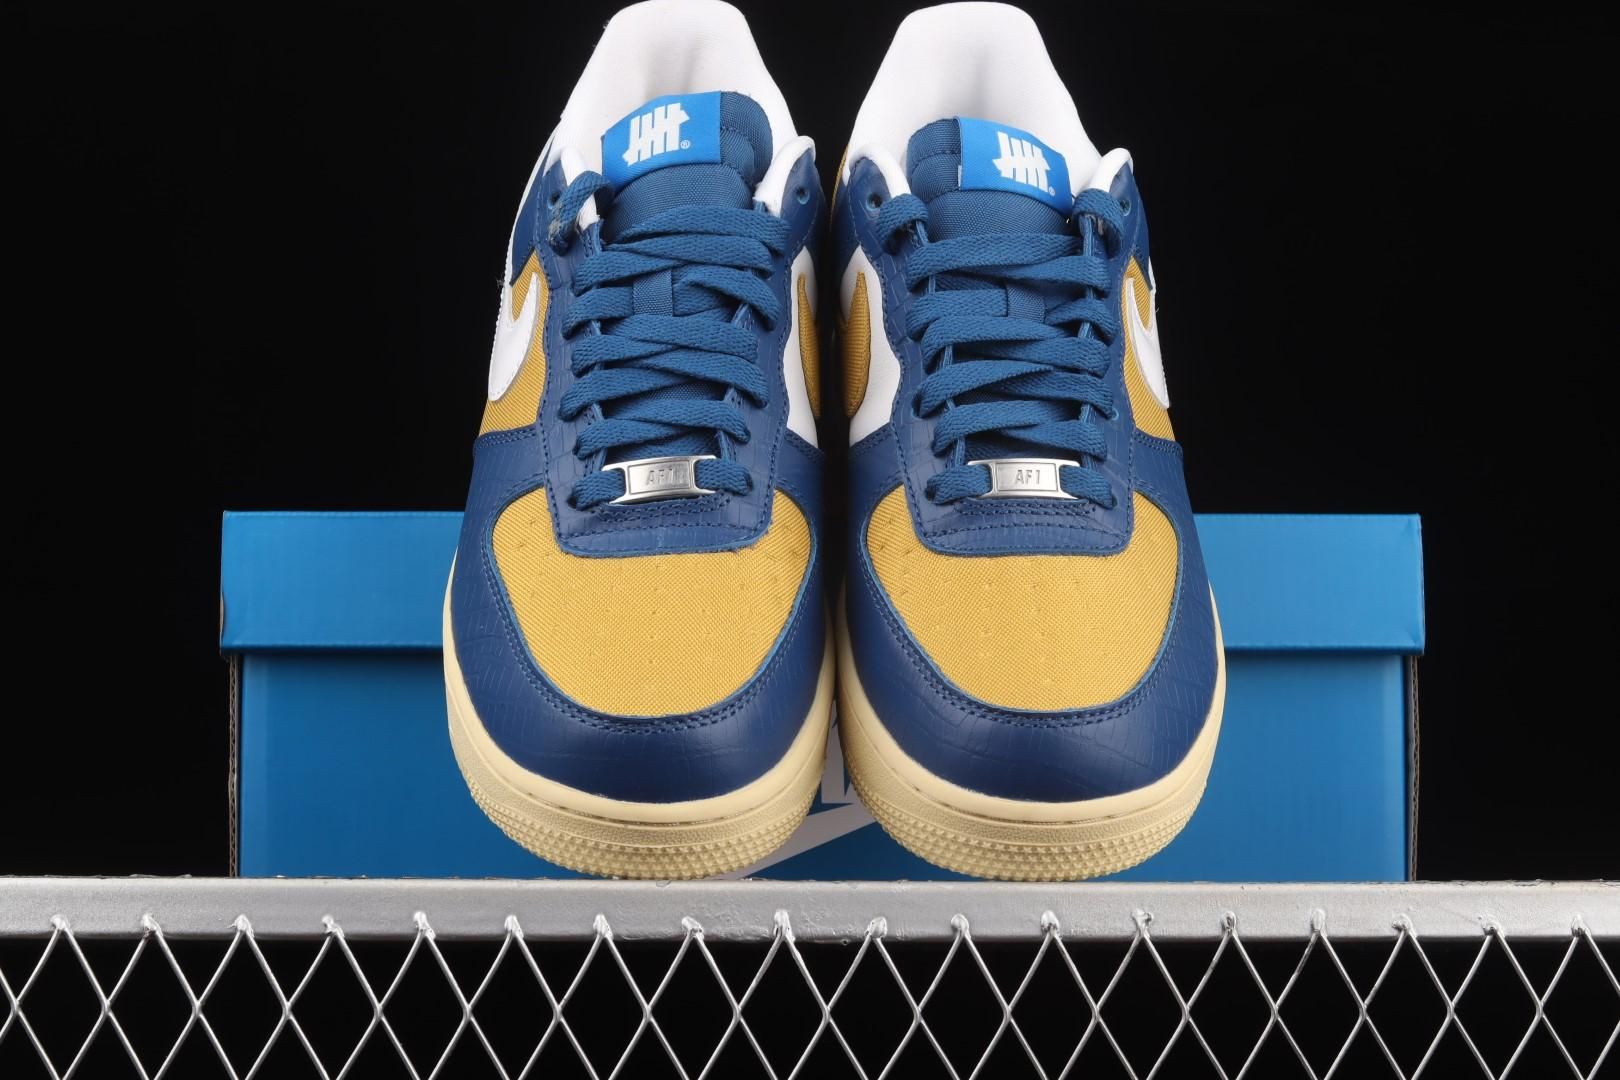 UNDEFEATED x NikeMen's Air Force 1 AF1 - Blue Yellow Croc